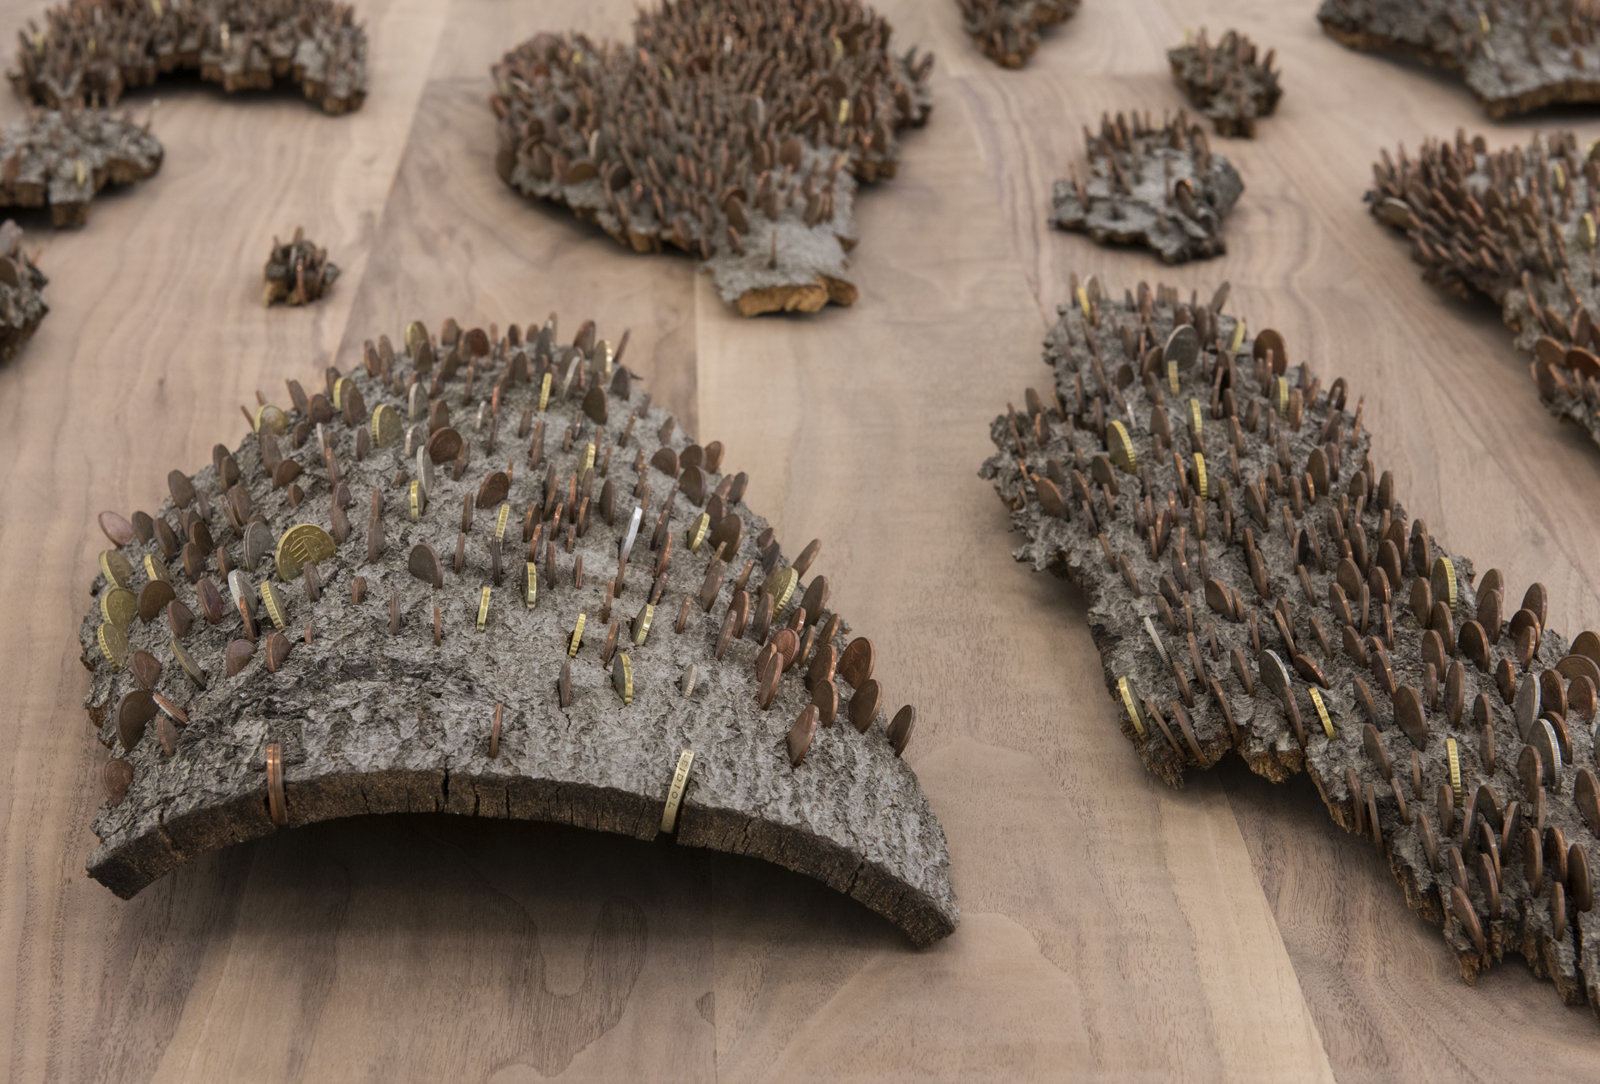 Ashes Withyman, Entrance Fee from a place, near the buried canal (detail), 2012–2016, 43 pieces of bark with various currency, wood table, 27 x 45 x 136 in. (69 x 114 x 346 cm)